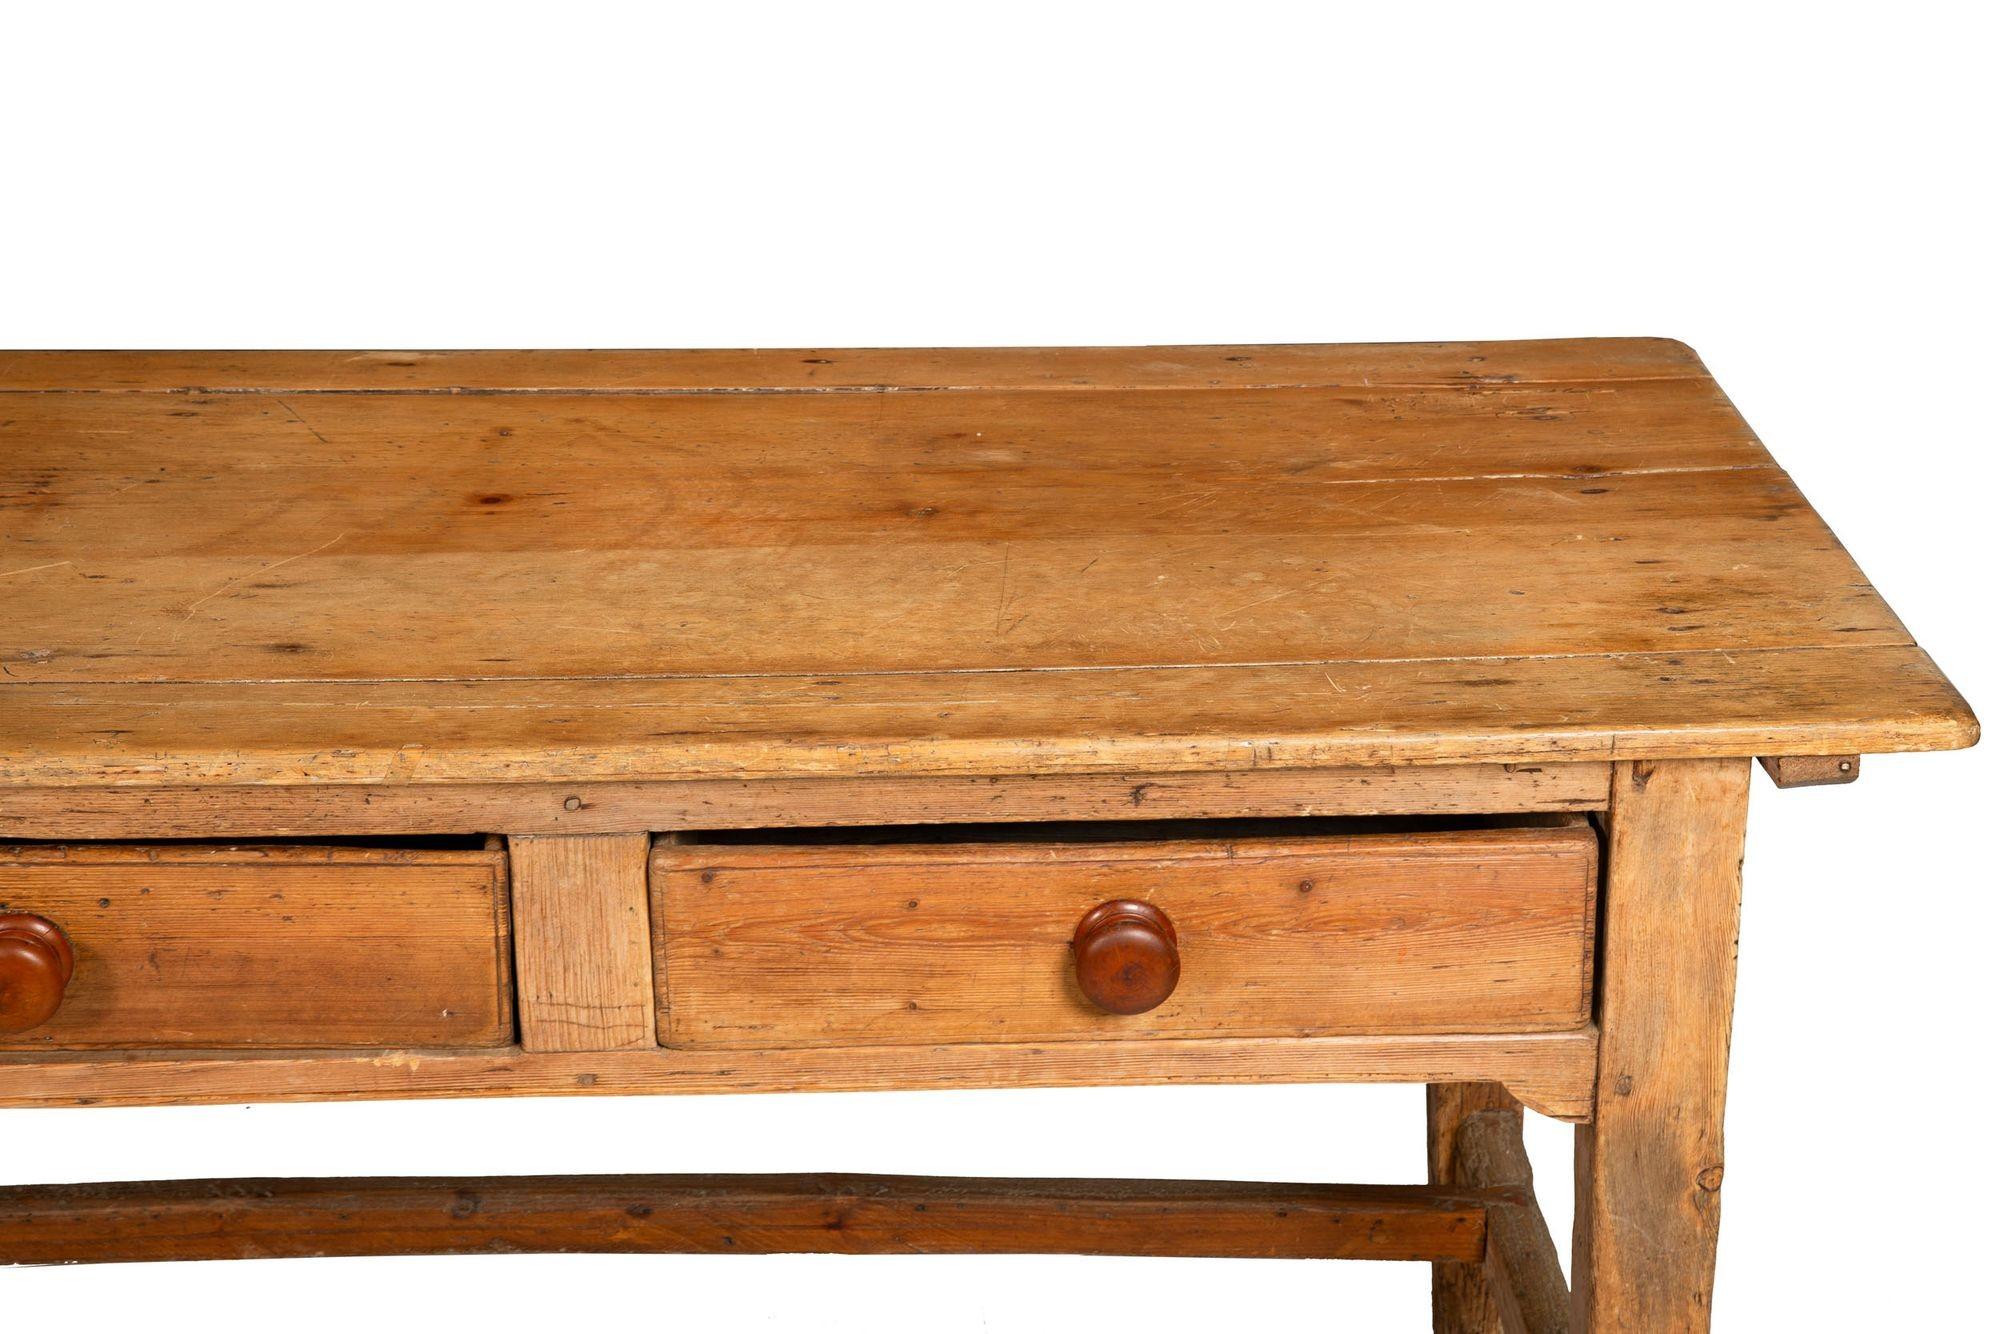 Worn and Patinated English Antique Pine Tavern Table Desk For Sale 4